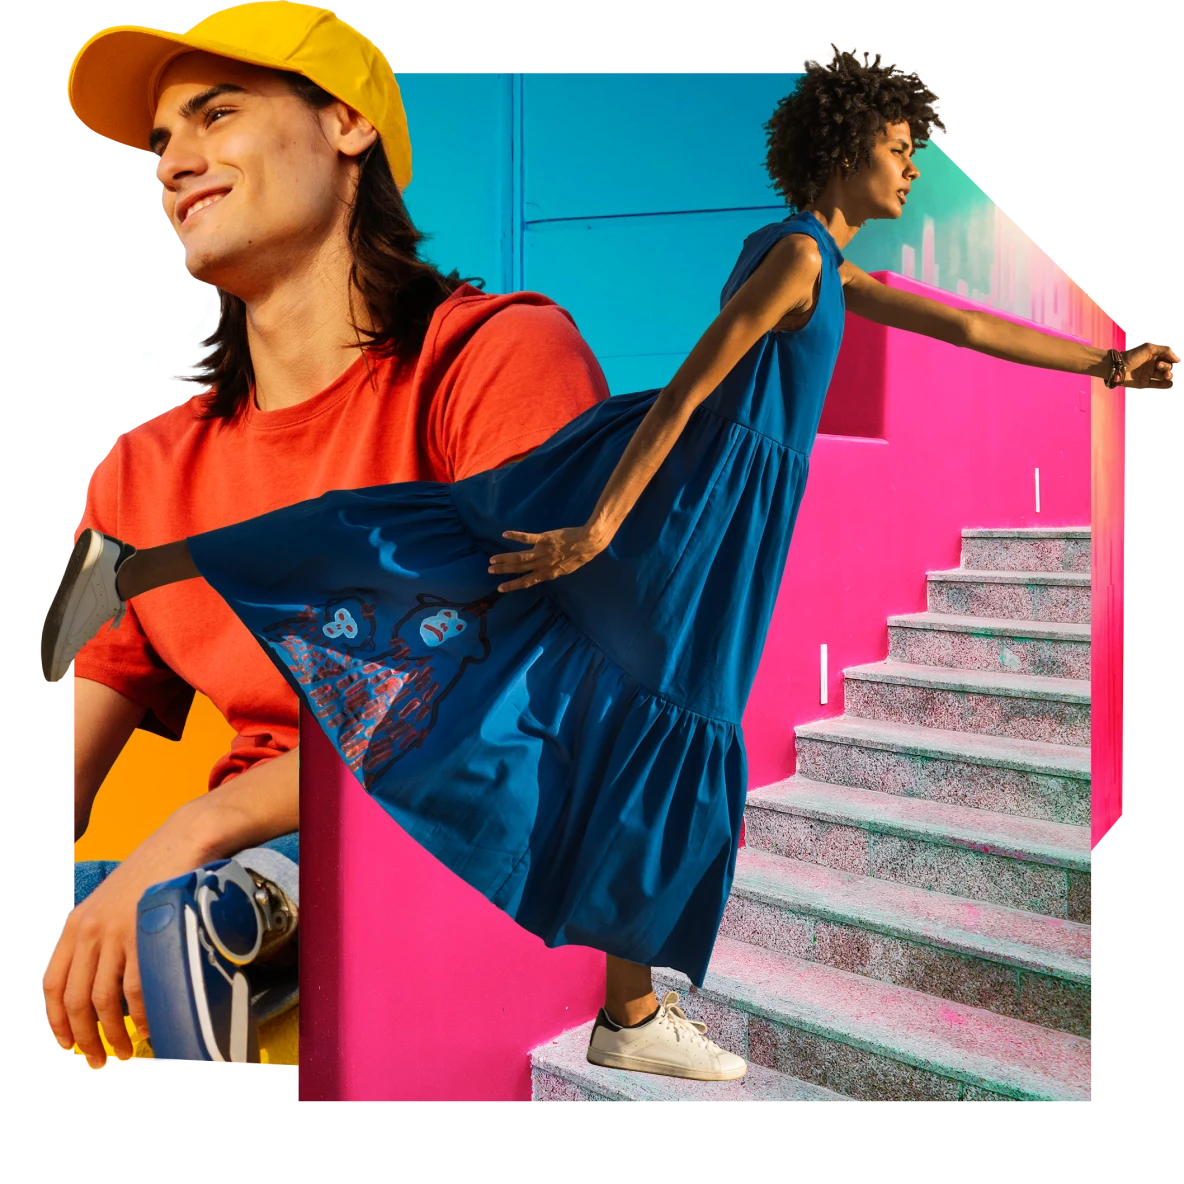 A white man with prosthetic legs and long dark hair wears a bright yellow baseball cap and orange shirt. A Black woman in a breezy blue dress is walking up grey stairs in a pink stairway. Blue background.